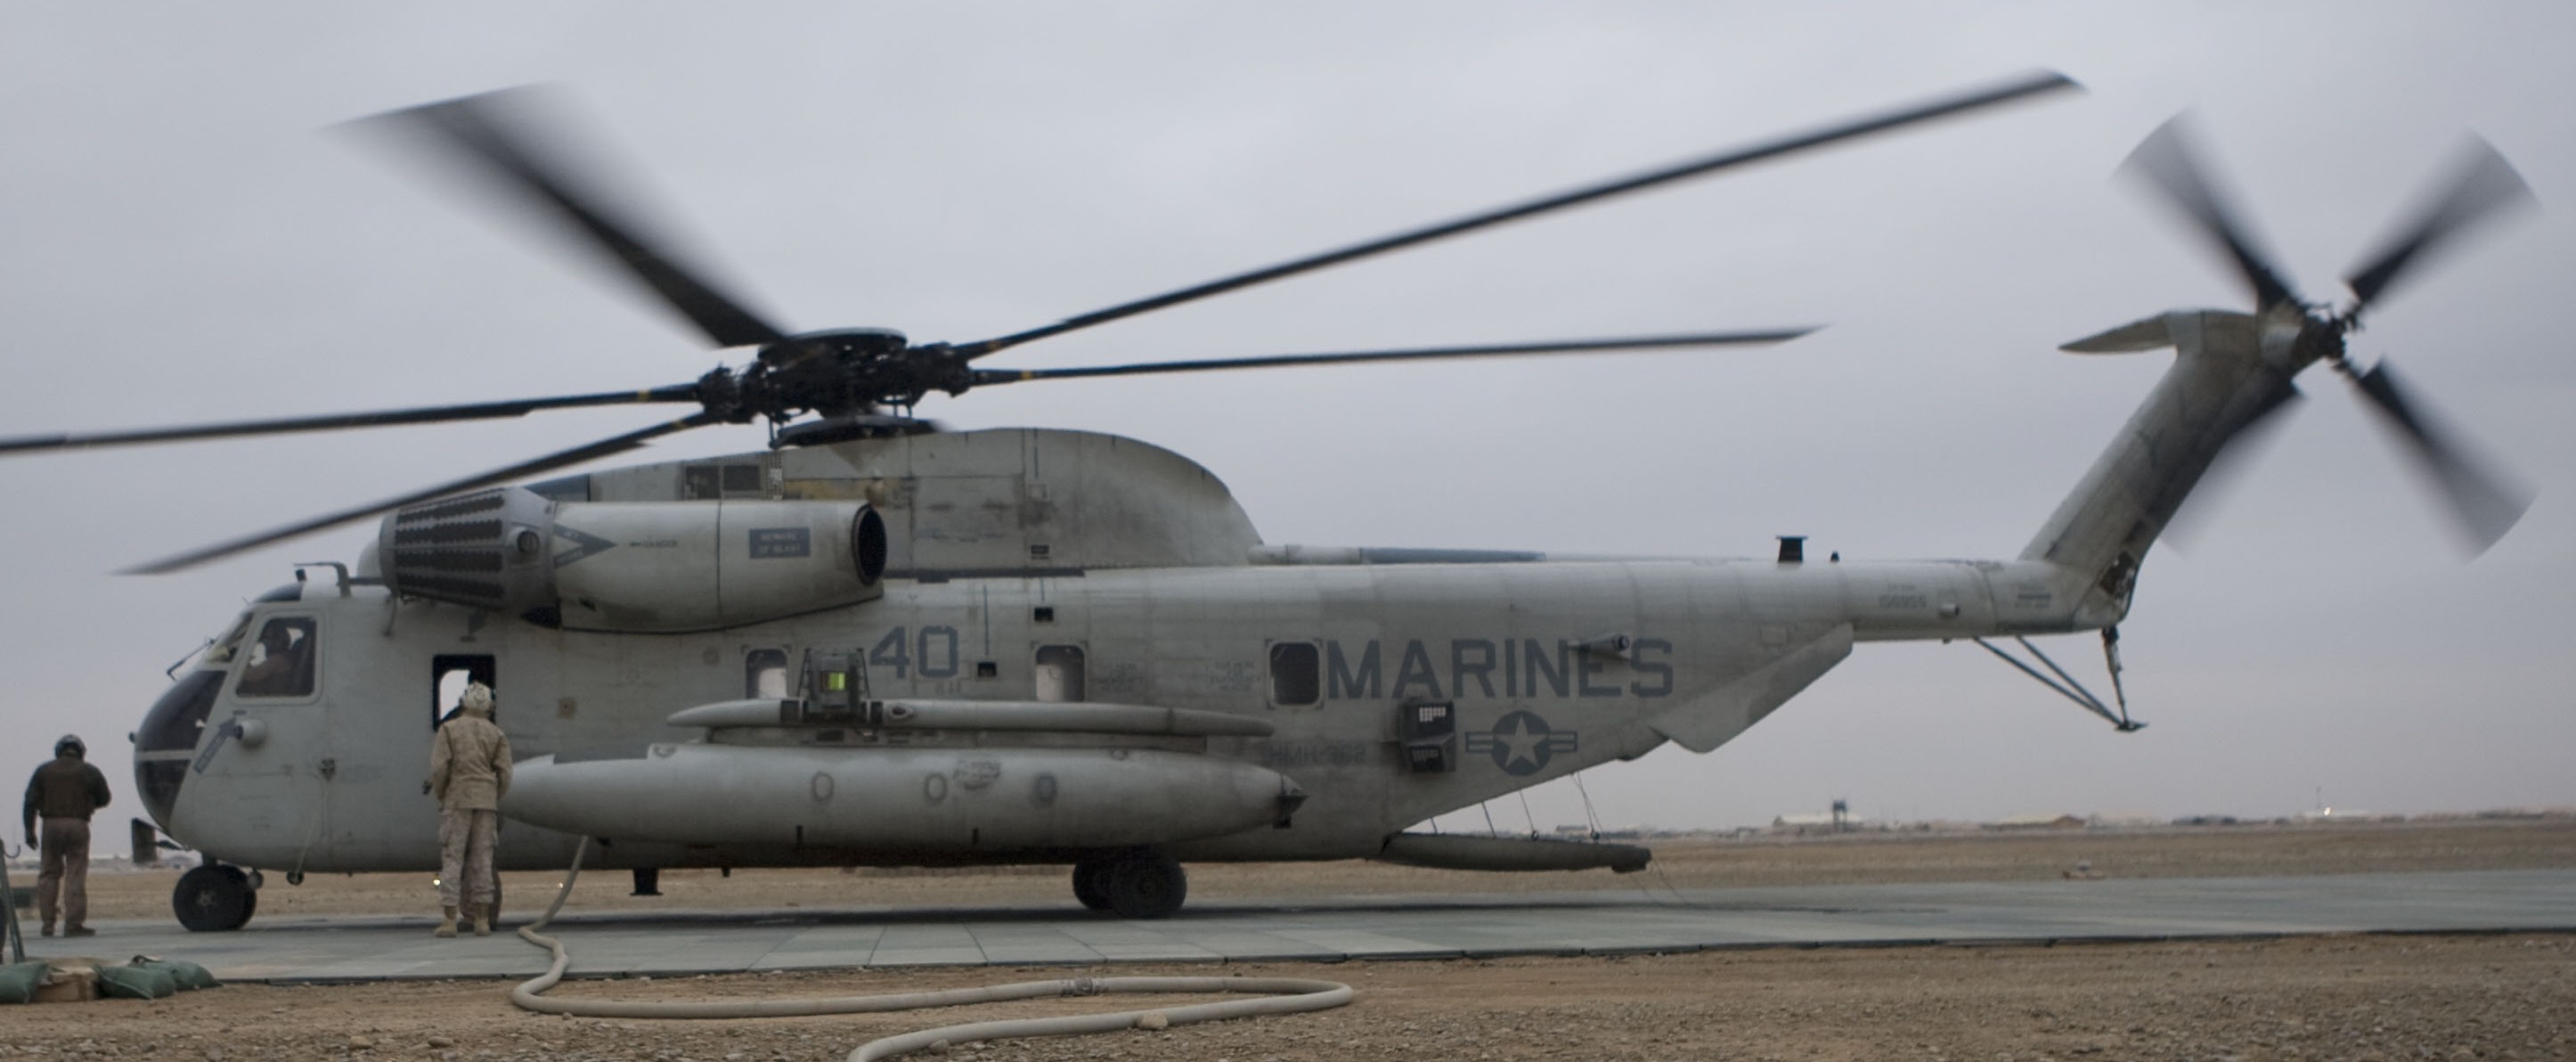 hmh-362 ugly angels marine heavy helicopter squadron usmc sikorsky ch-53d sea stallion 45